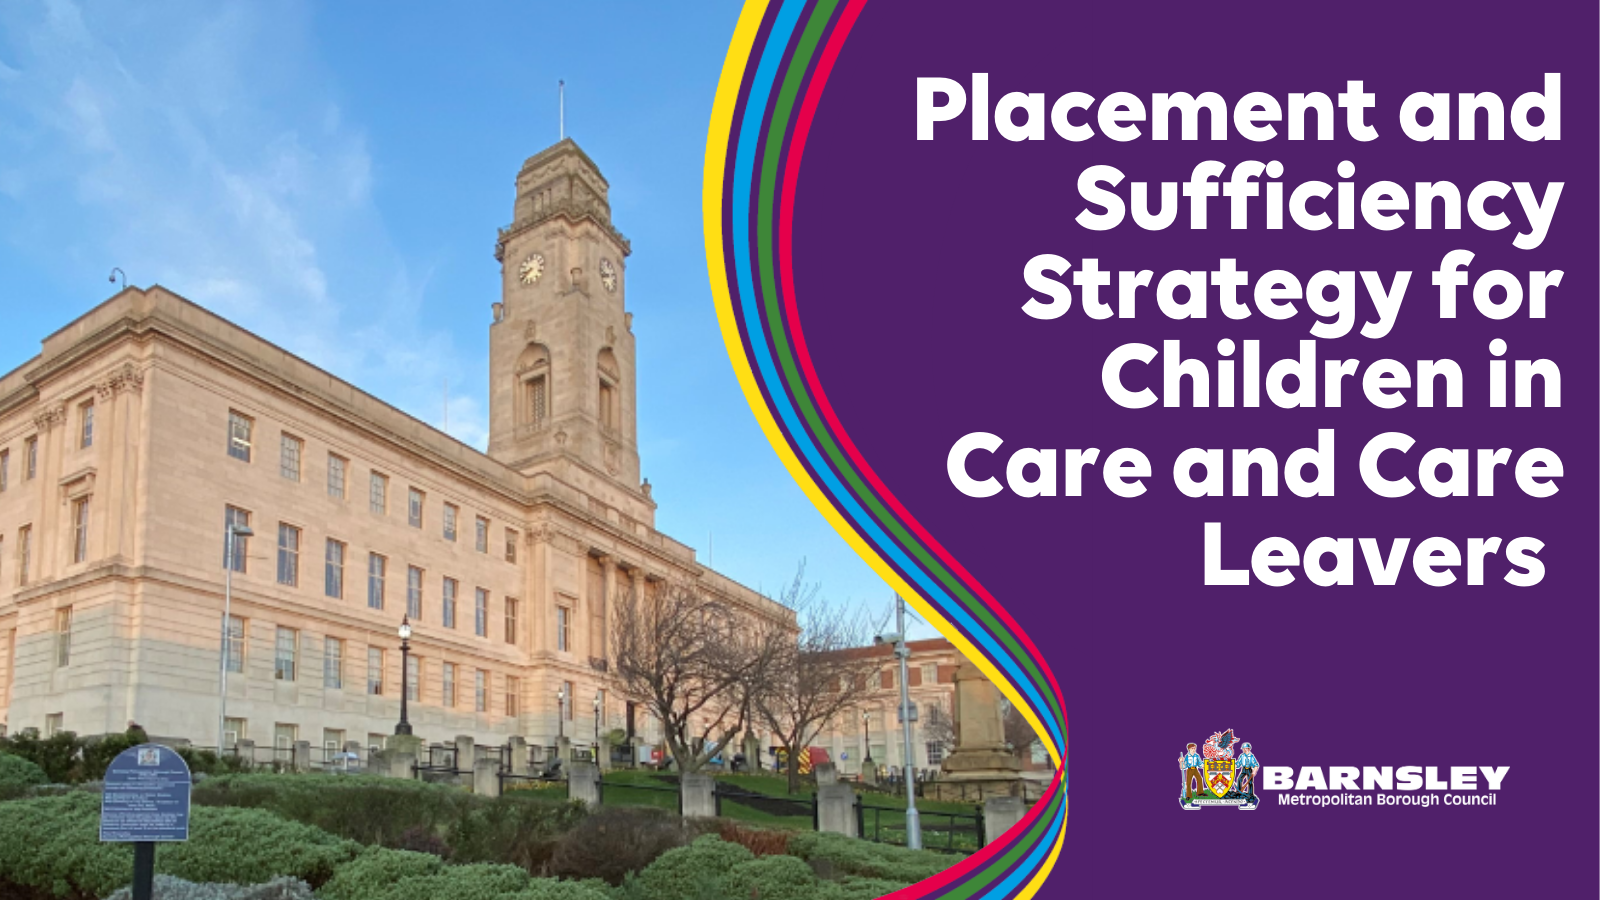 Placement and Sufficiency Strategy for Children in Care and Care Leavers